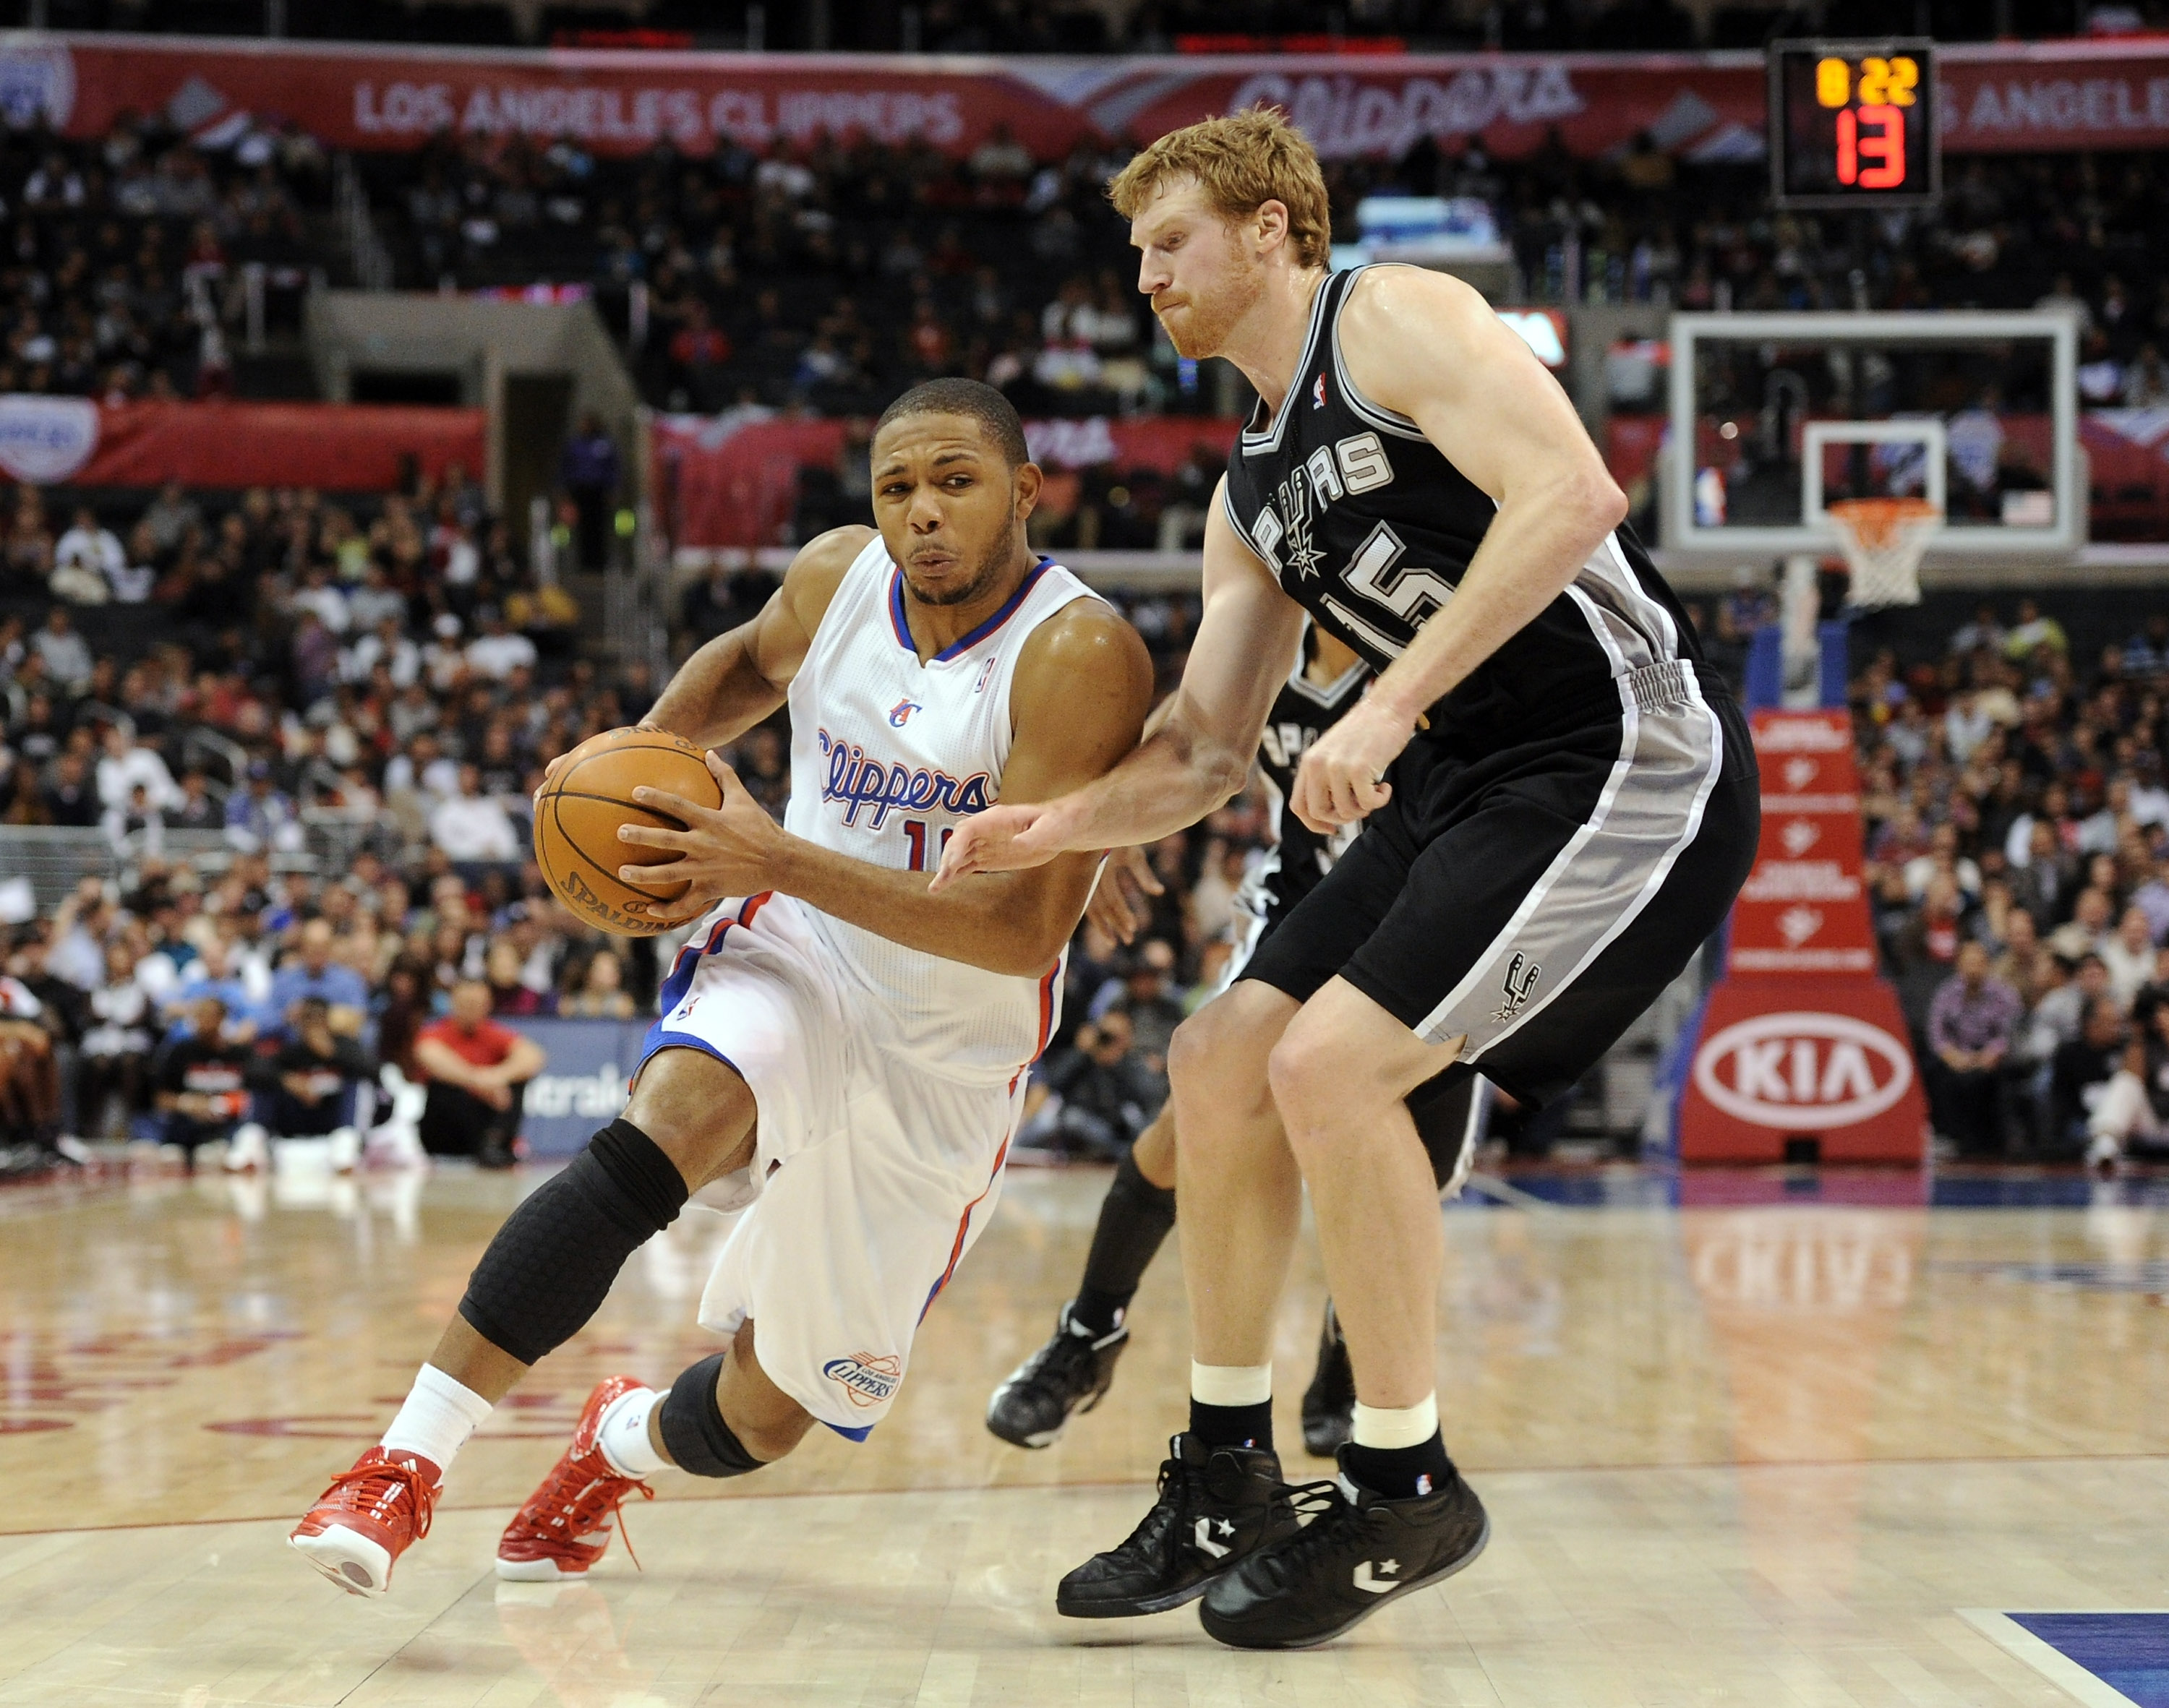 LOS ANGELES, CA - DECEMBER 01:  Eric Gordon #10 of the Los Angeles Clippers drives around Matt Bonner #15 of the San Antonio Spurs during the game at the Staples Center on December 1, 2010 in Los Angeles, California.  NOTE TO USER: User expressly acknowle